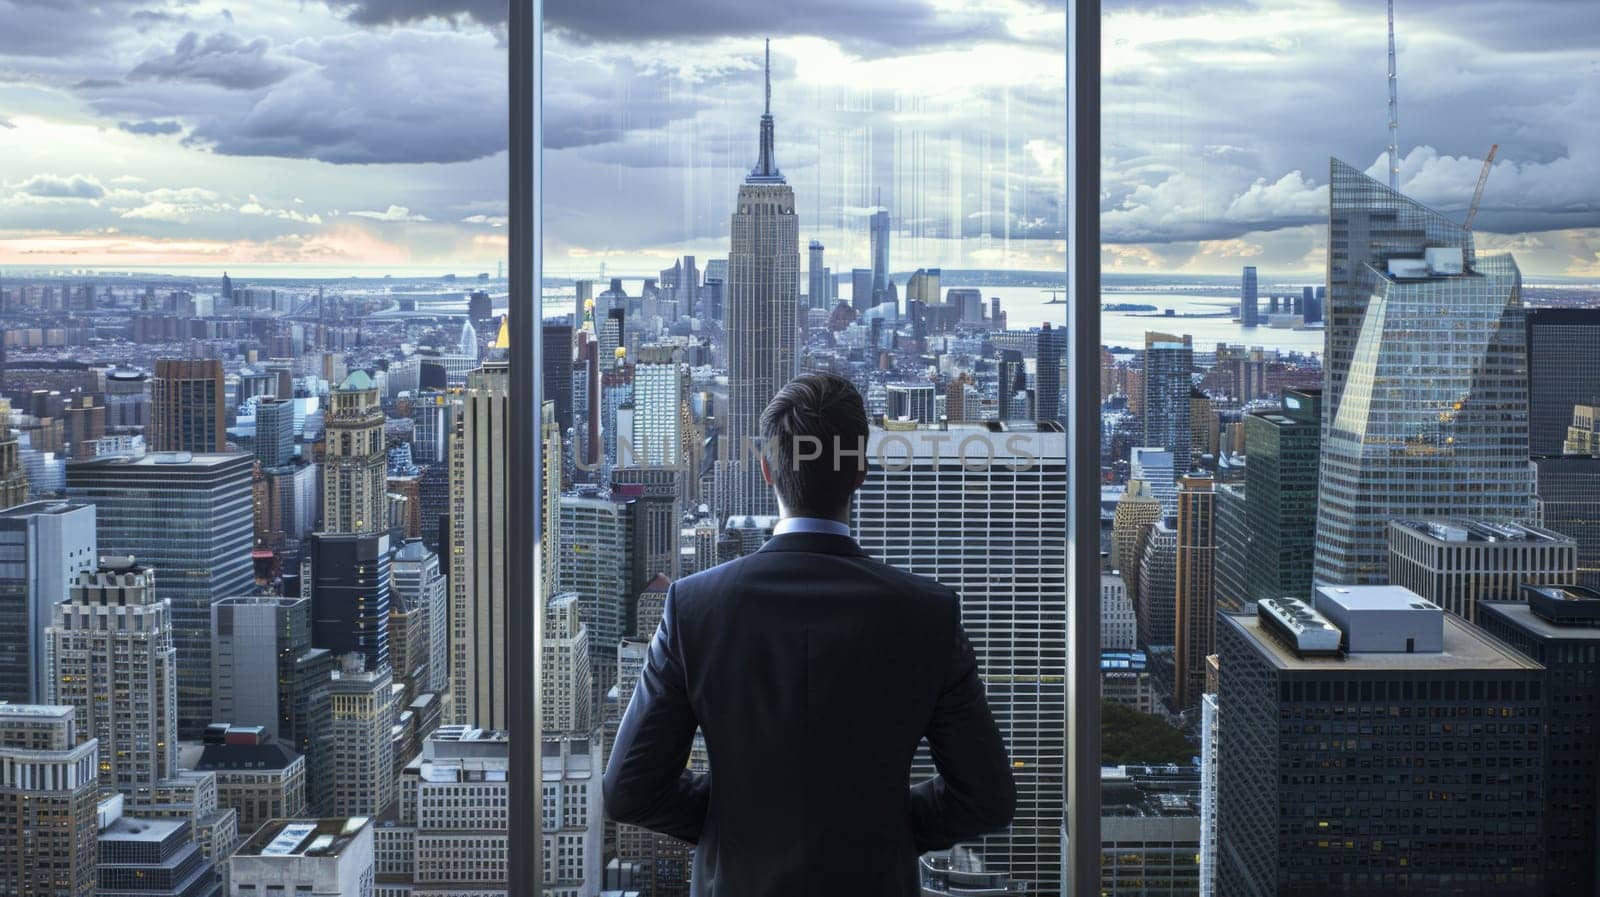 Rear view of a business man in a suit looking out a window at the city with skyscrapers in the background.